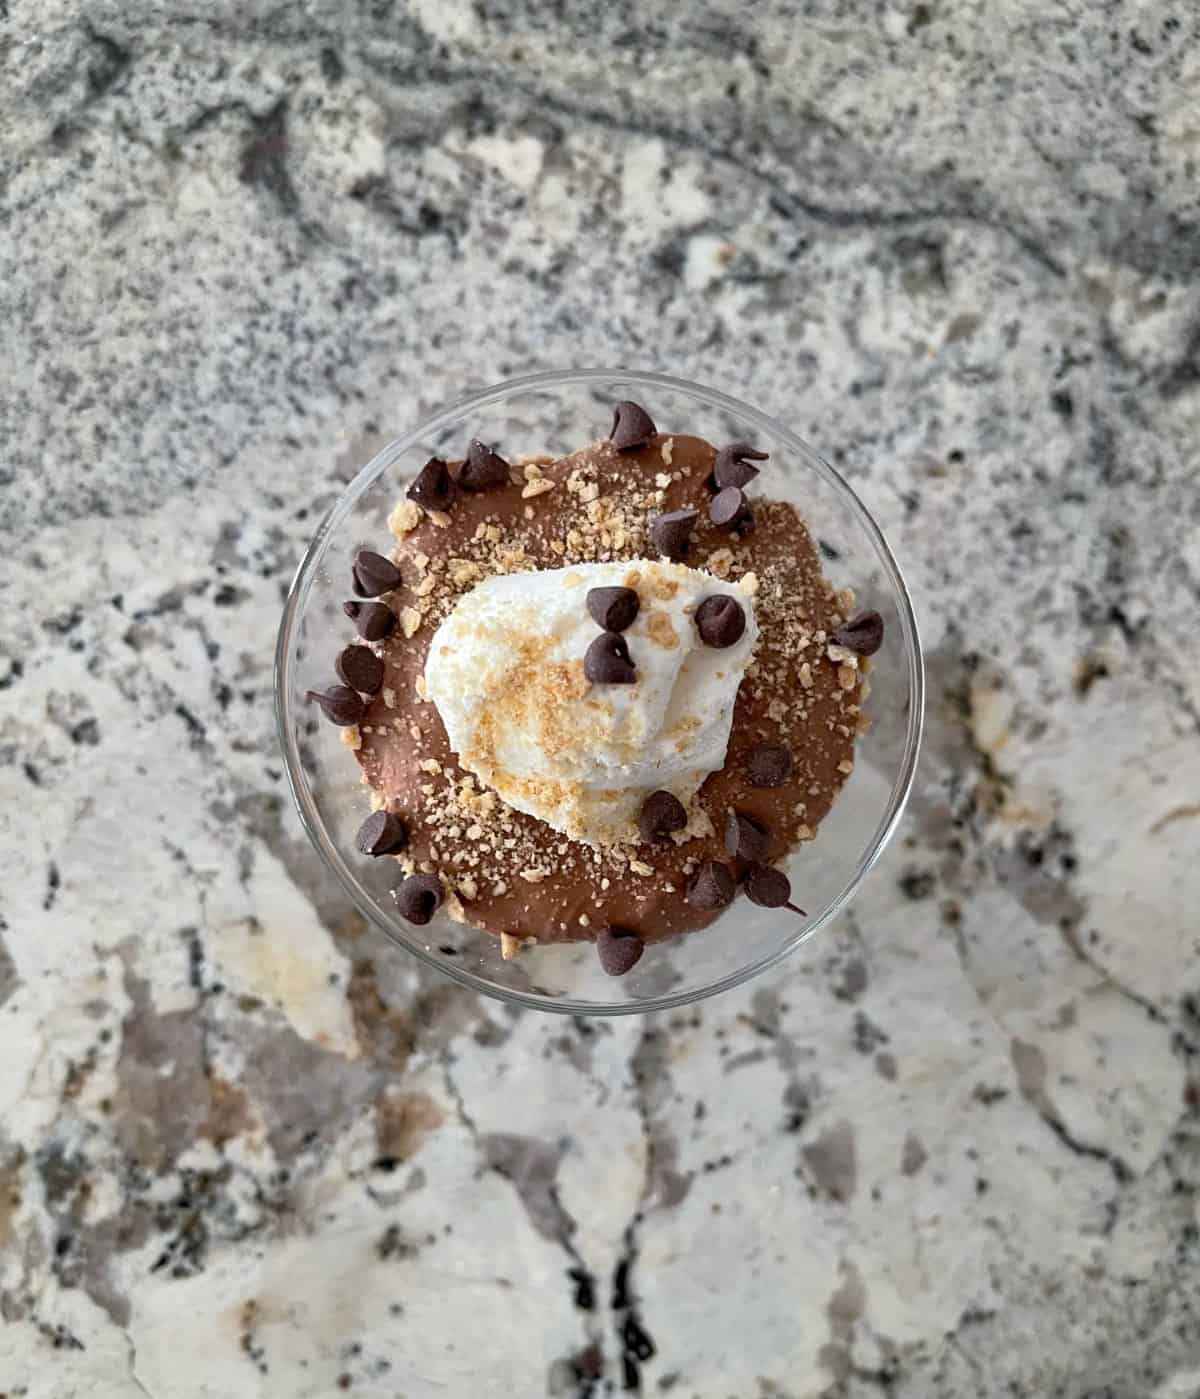 Looking down on chocolate cheesecake dessert cup garnished with whipped topping, graham cracker crumbs and mini chocolate chips.